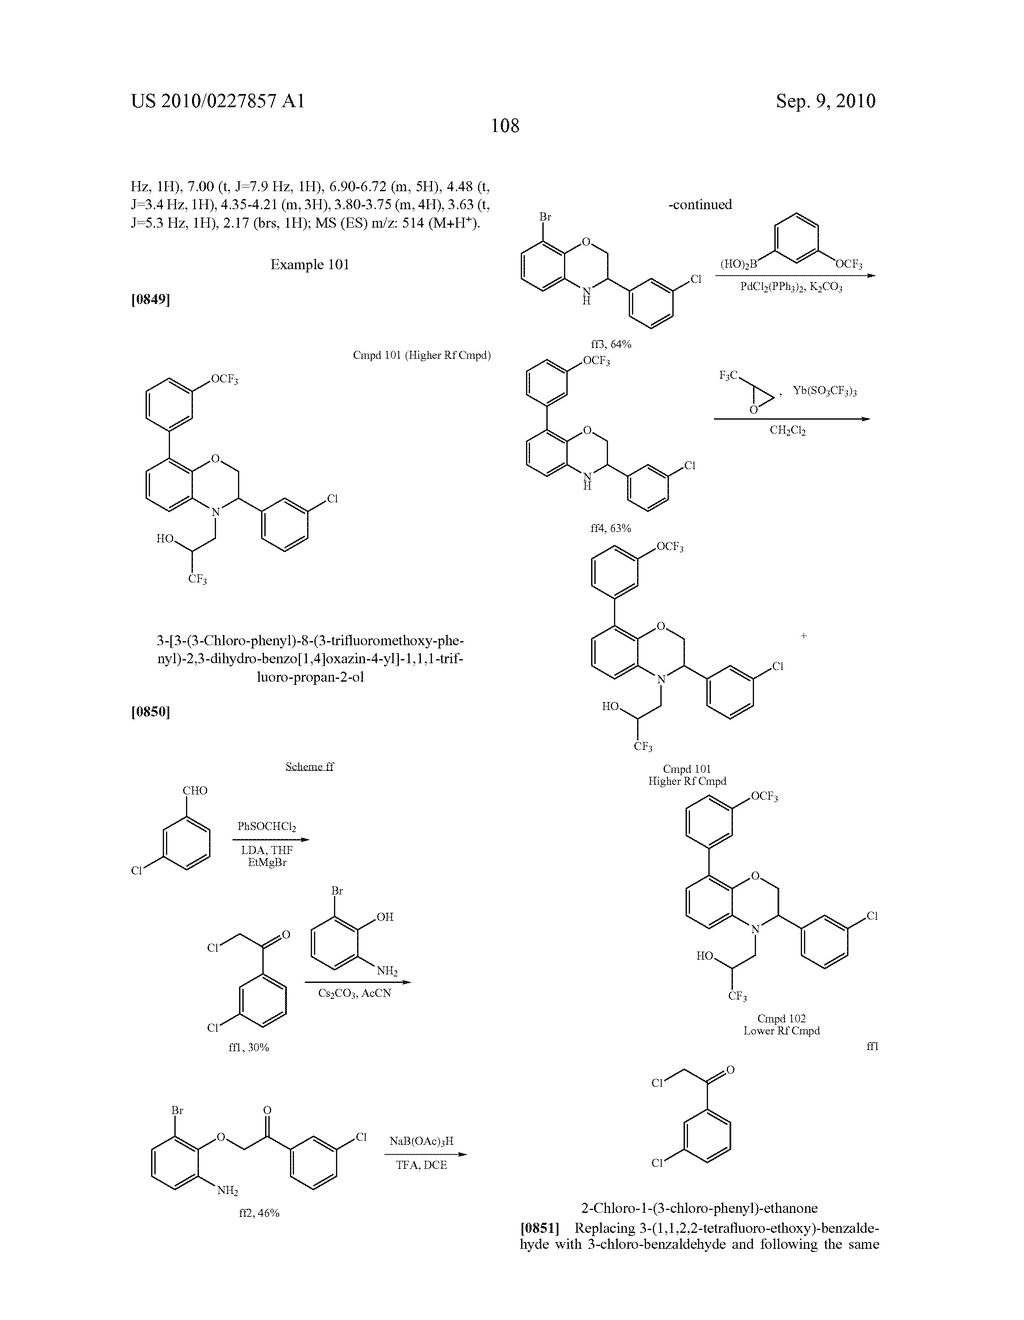 3,4-DIHYDRO-2H-BENZO[1,4]OXAZINE AND THIAZINE DERIVATIVES AS CETP INHIBITORS - diagram, schematic, and image 109